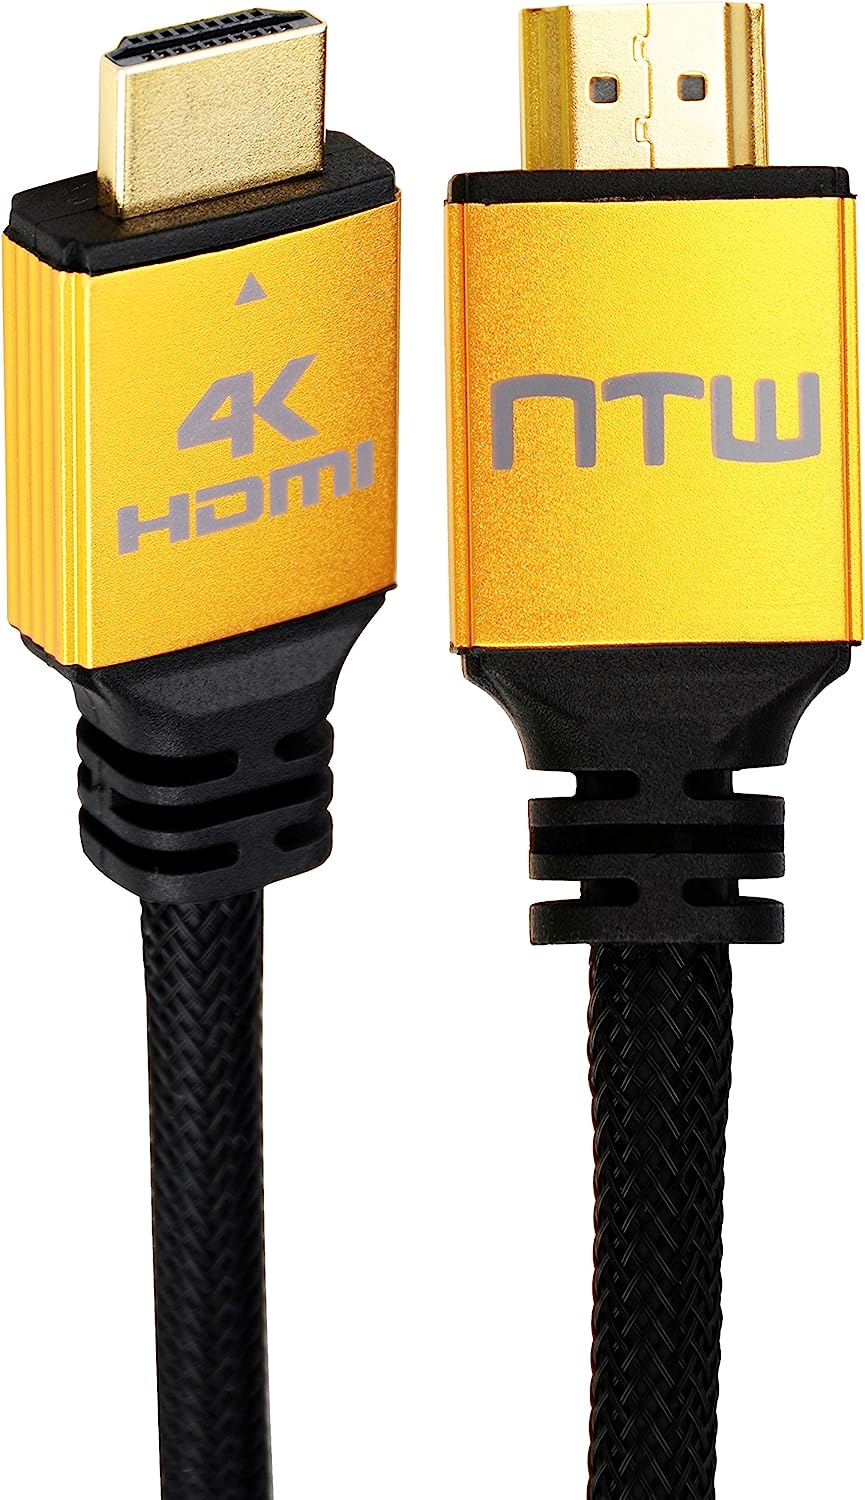 NTW PURE PRO 4K HDMI Cable 6FT High Speed 18Gbps HDMI [...]